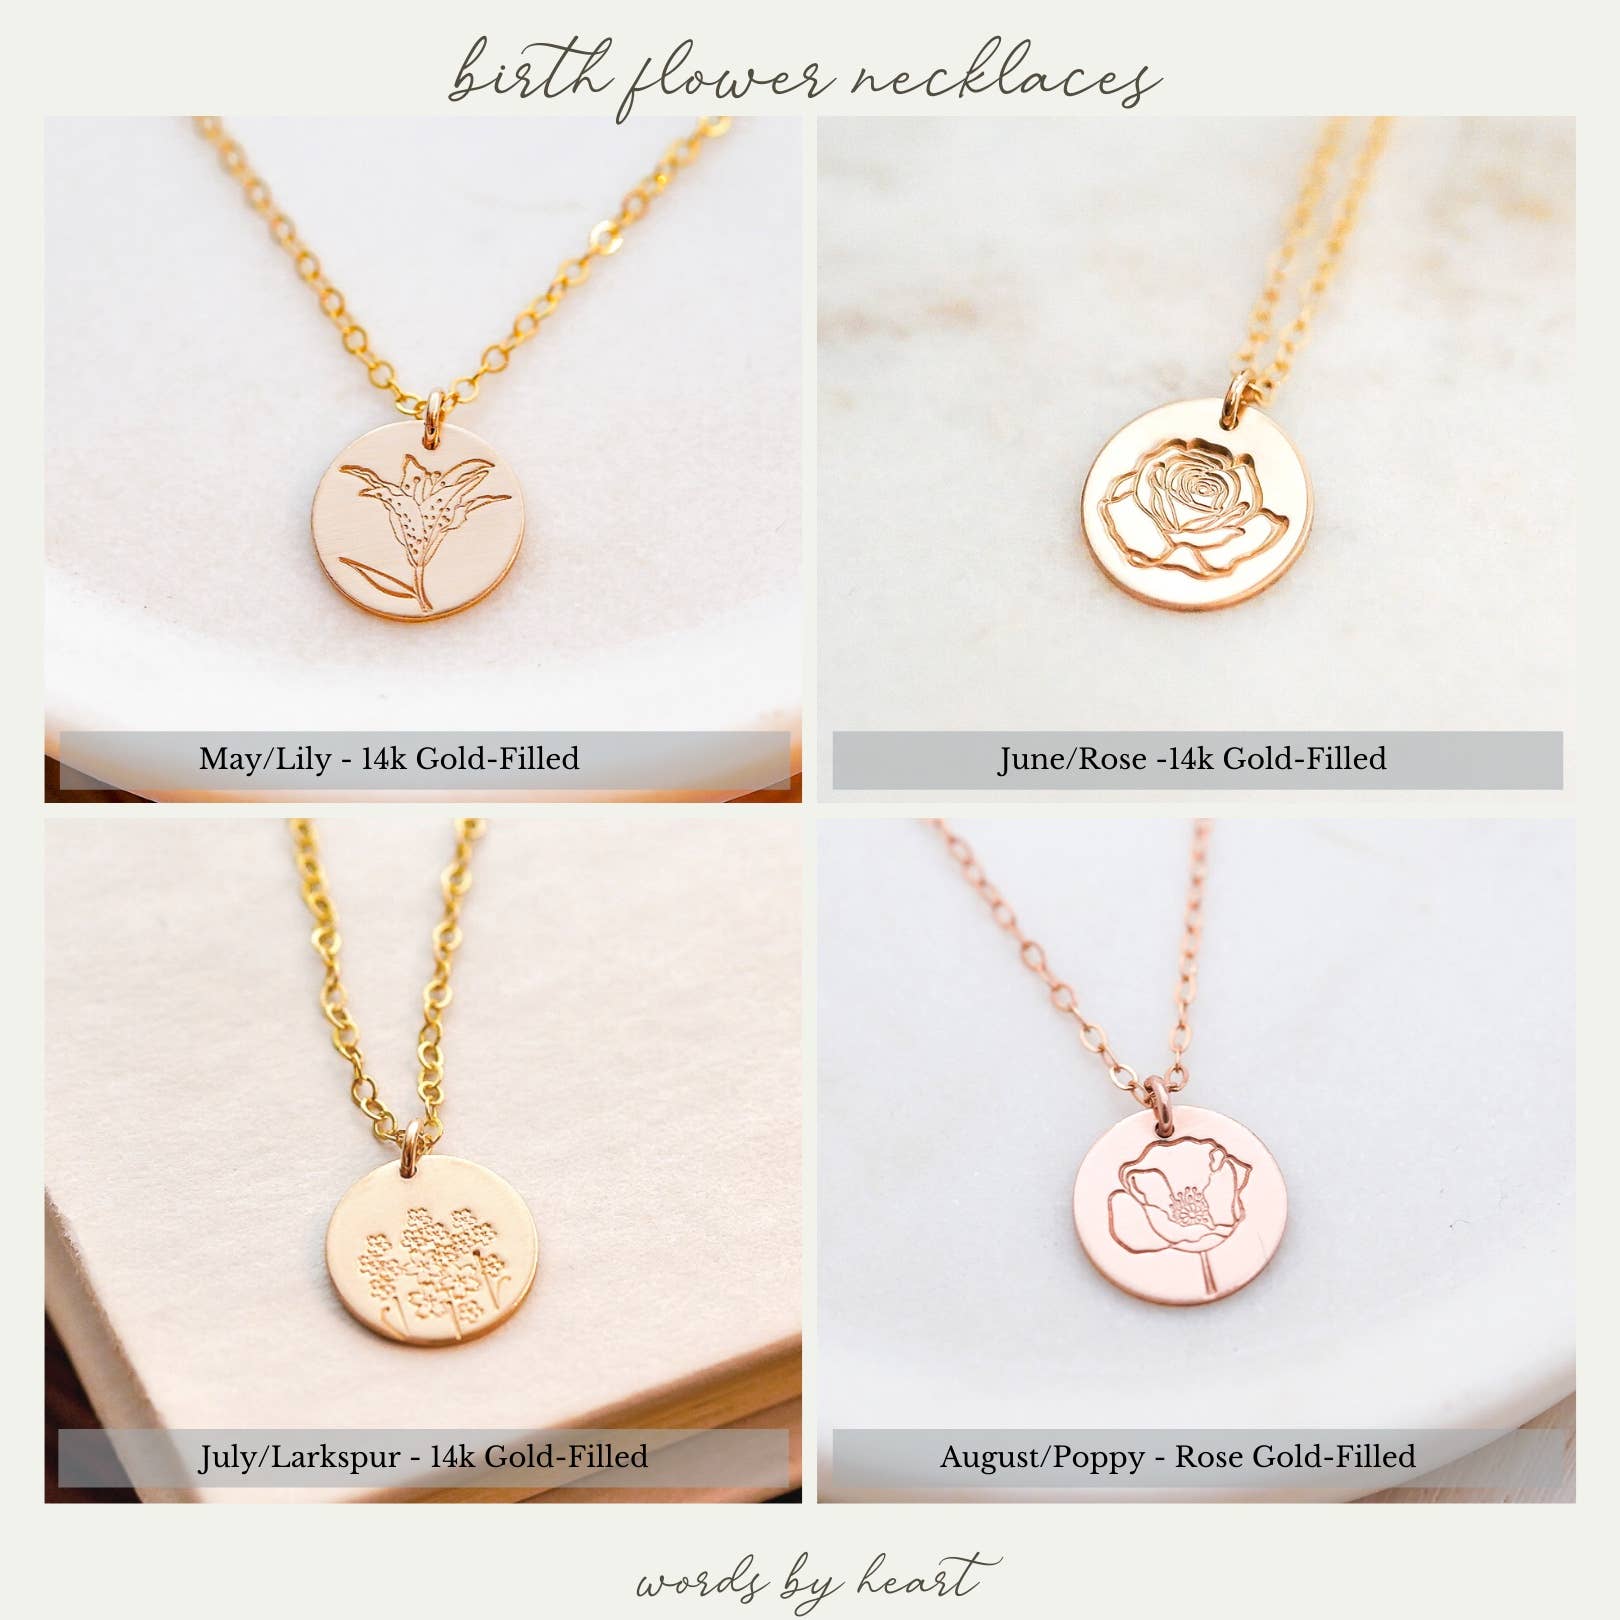 A Loving Parents Words Of Wisdom Personalized Heart-Shaped Pendant Necklace  With 18K Gold-Plated Accents Engraved With Inspirational Words